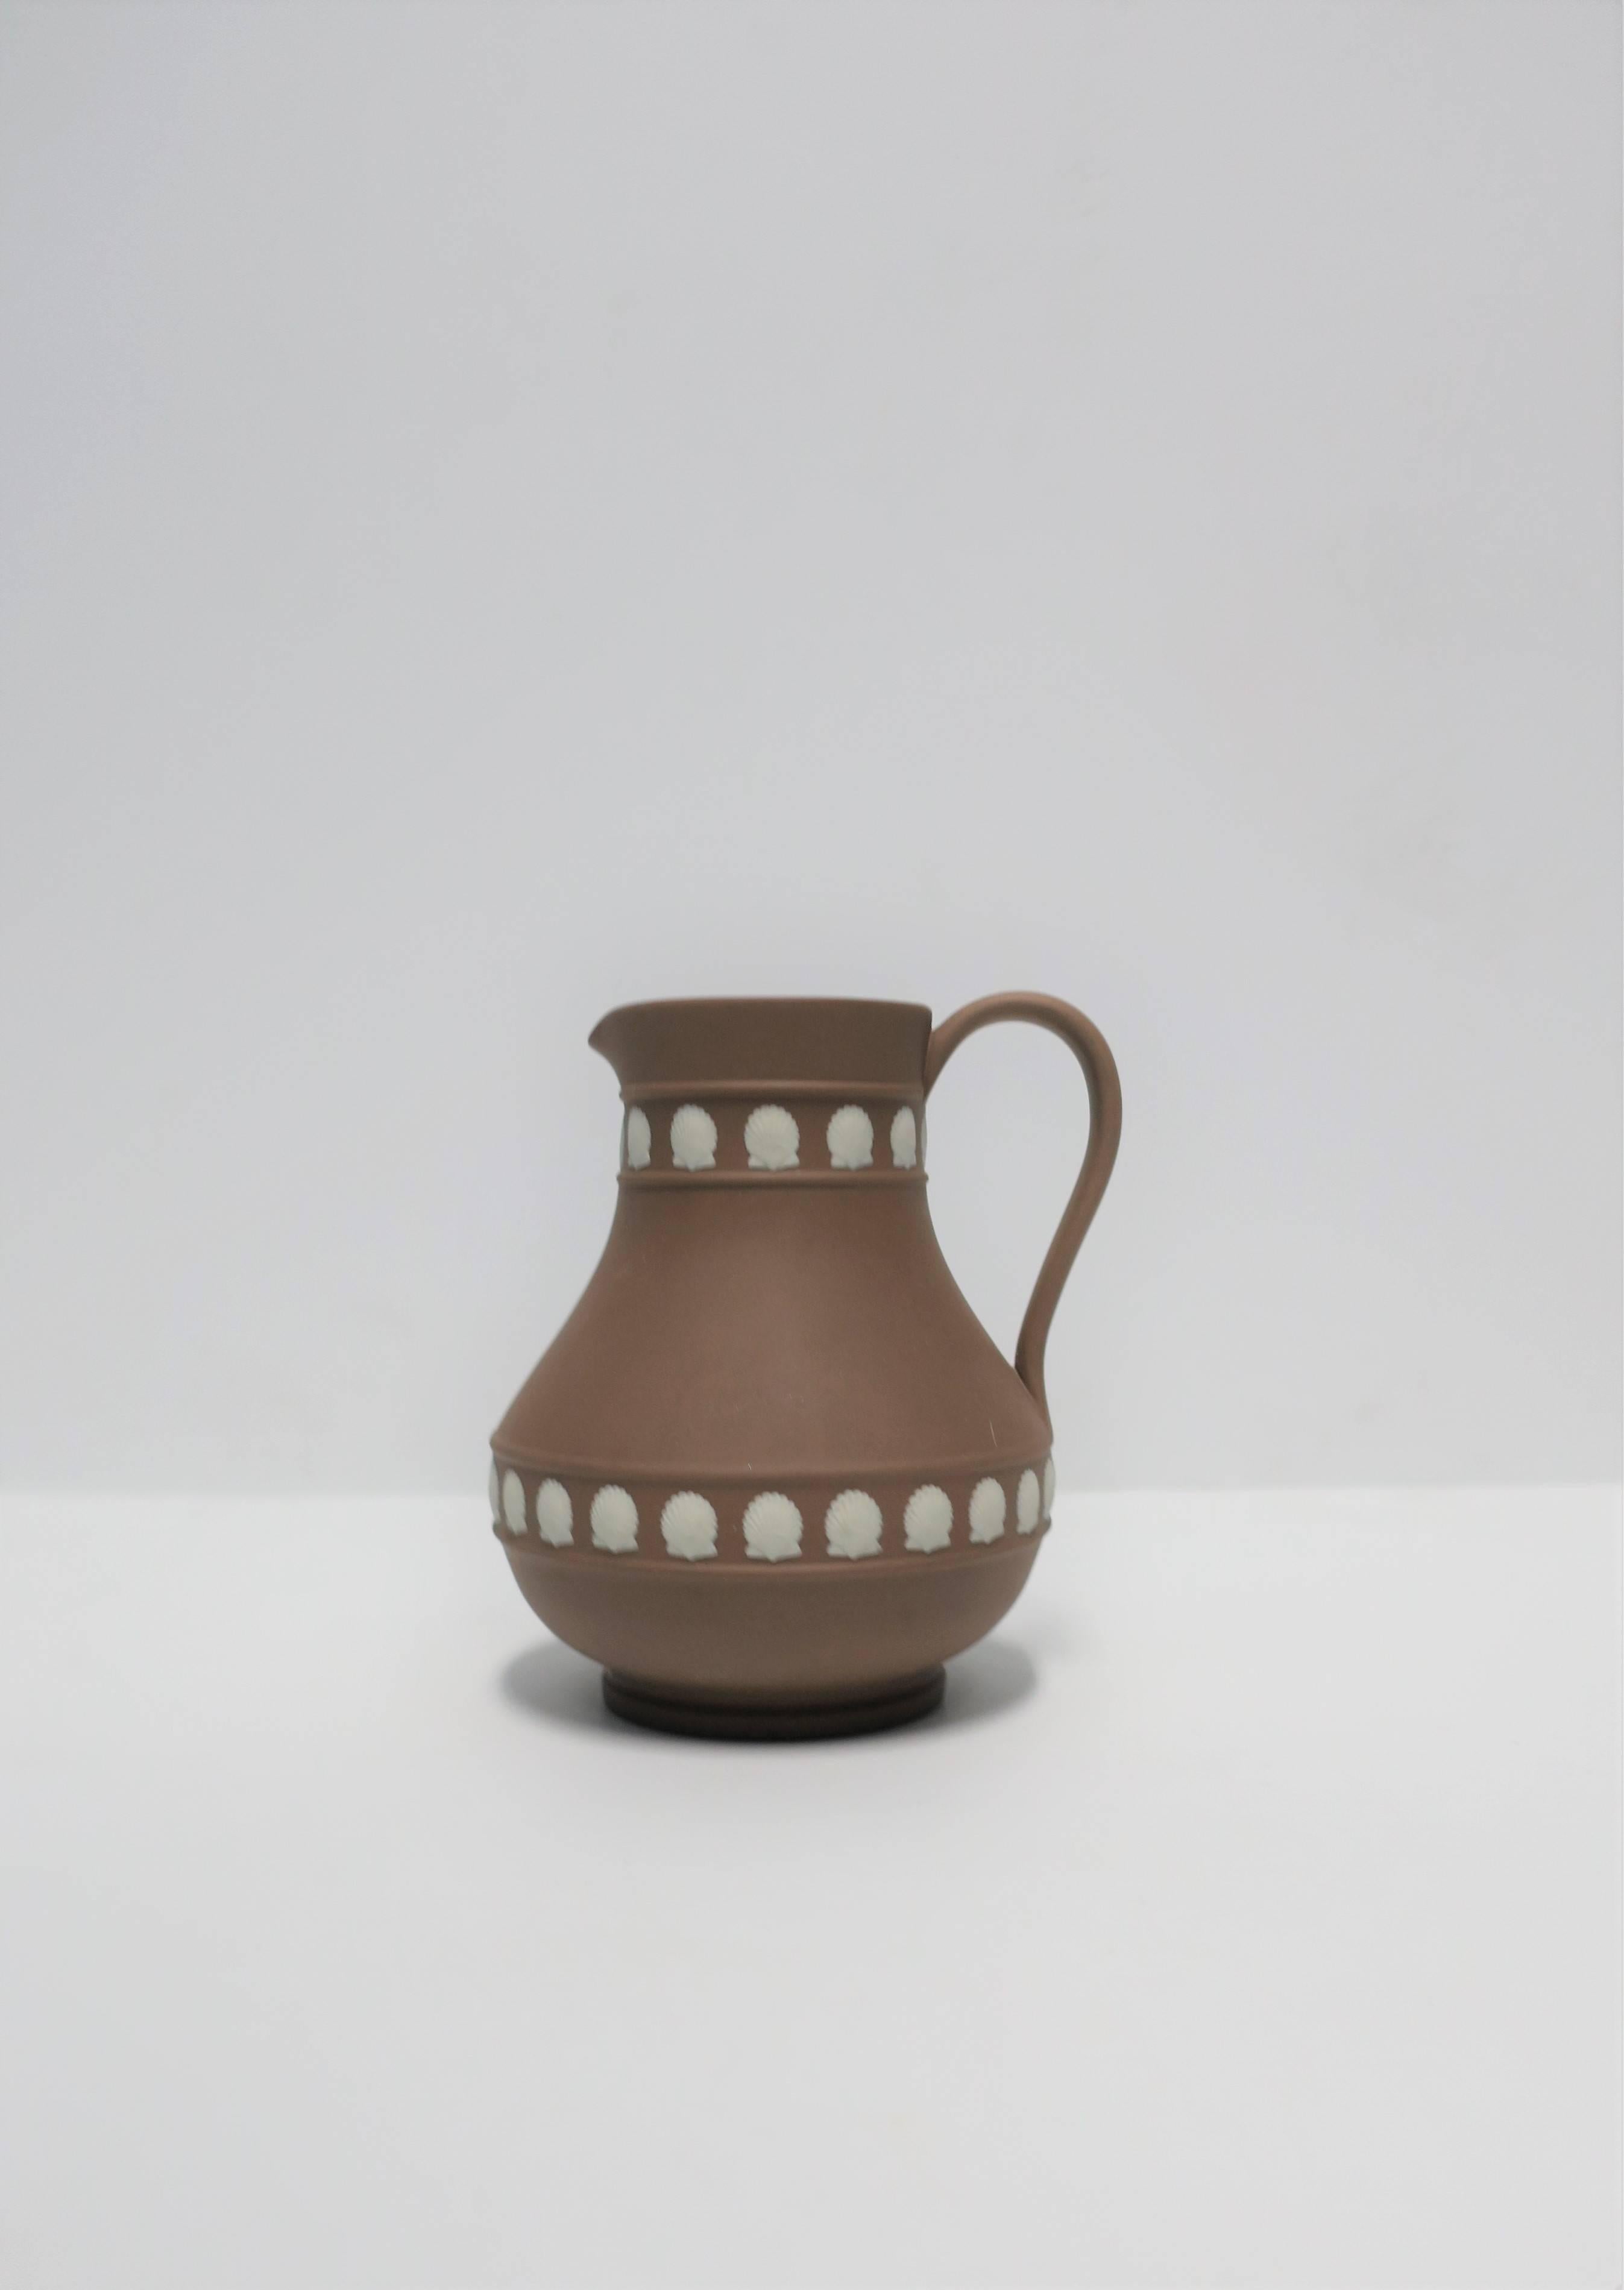 A beautiful Wedgwood Jasperware creamer pitcher with oyster seashell design, circa 1970s England. This piece is a mocha brown or light brown with an off-white oyster seashell design. In image #8 please see maker's mark 'WEDGWOOD', 'Made in England'.